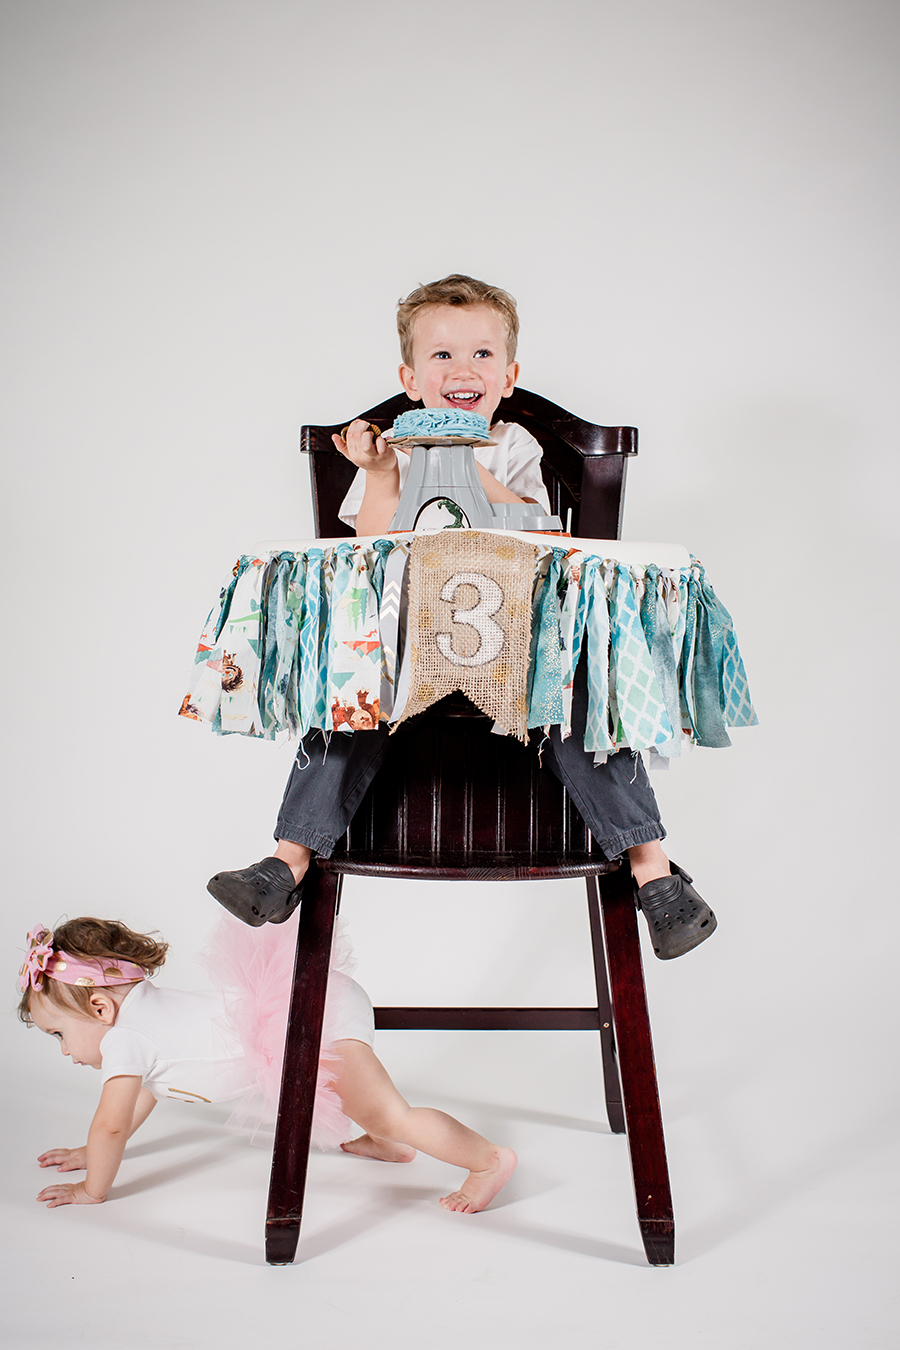 Boy in high chair by Knoxville Wedding Photographer, Amanda May Photos.